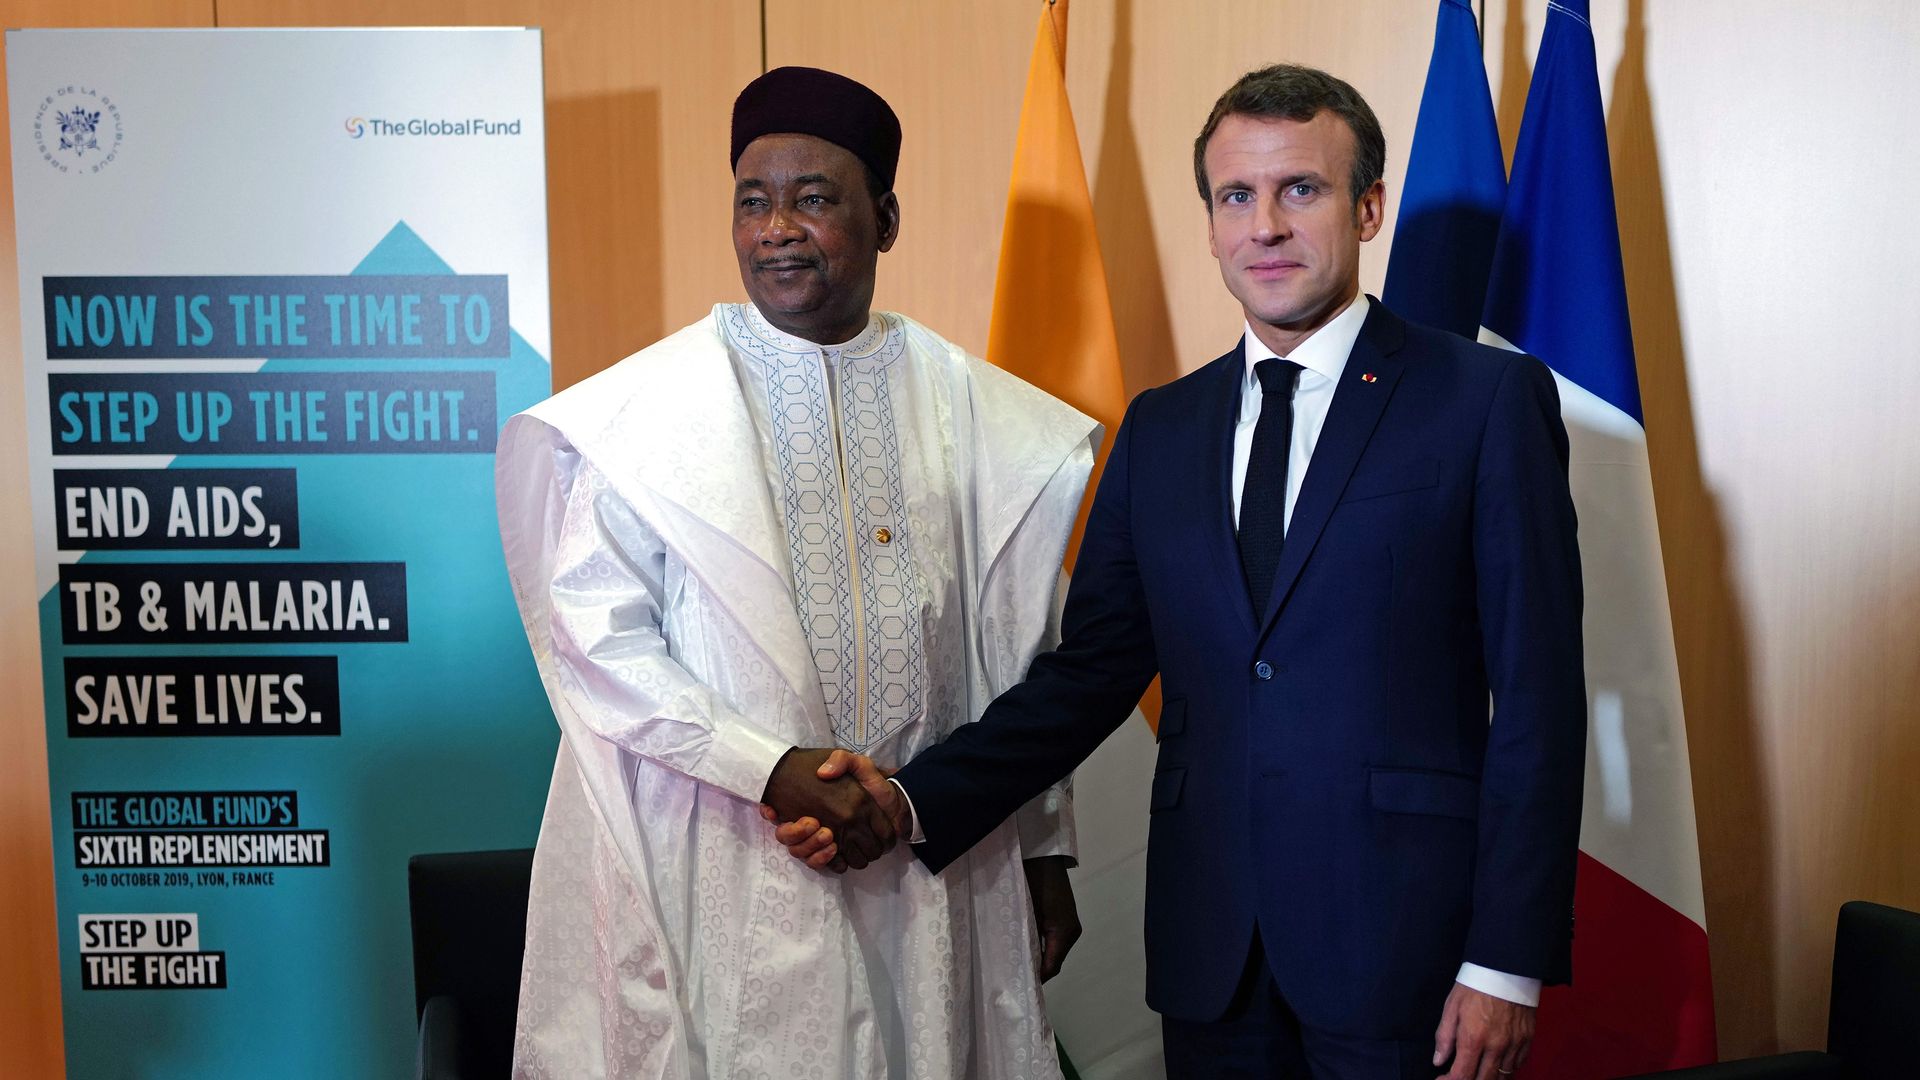 Emmanel Macron and Mahamadou Issoufou shake hands in front of flags and a Global Fund sign